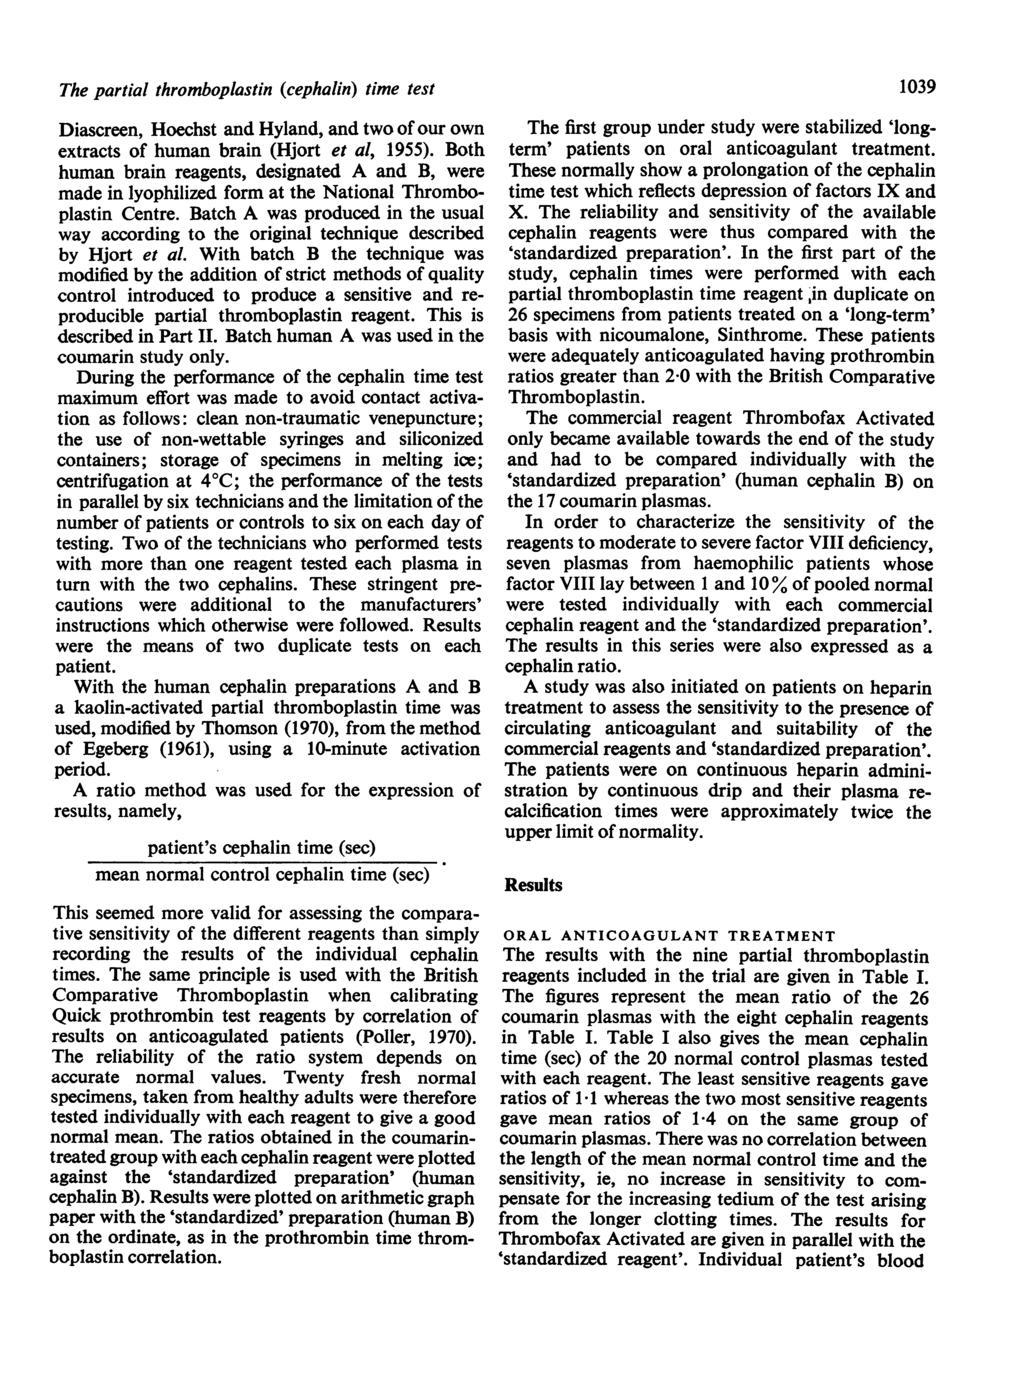 The partial thromboplastin (cephalin) time test Diascreen, Hoechst and Hyland, and two of our own extracts of human brain (Hjort et al, 1955).